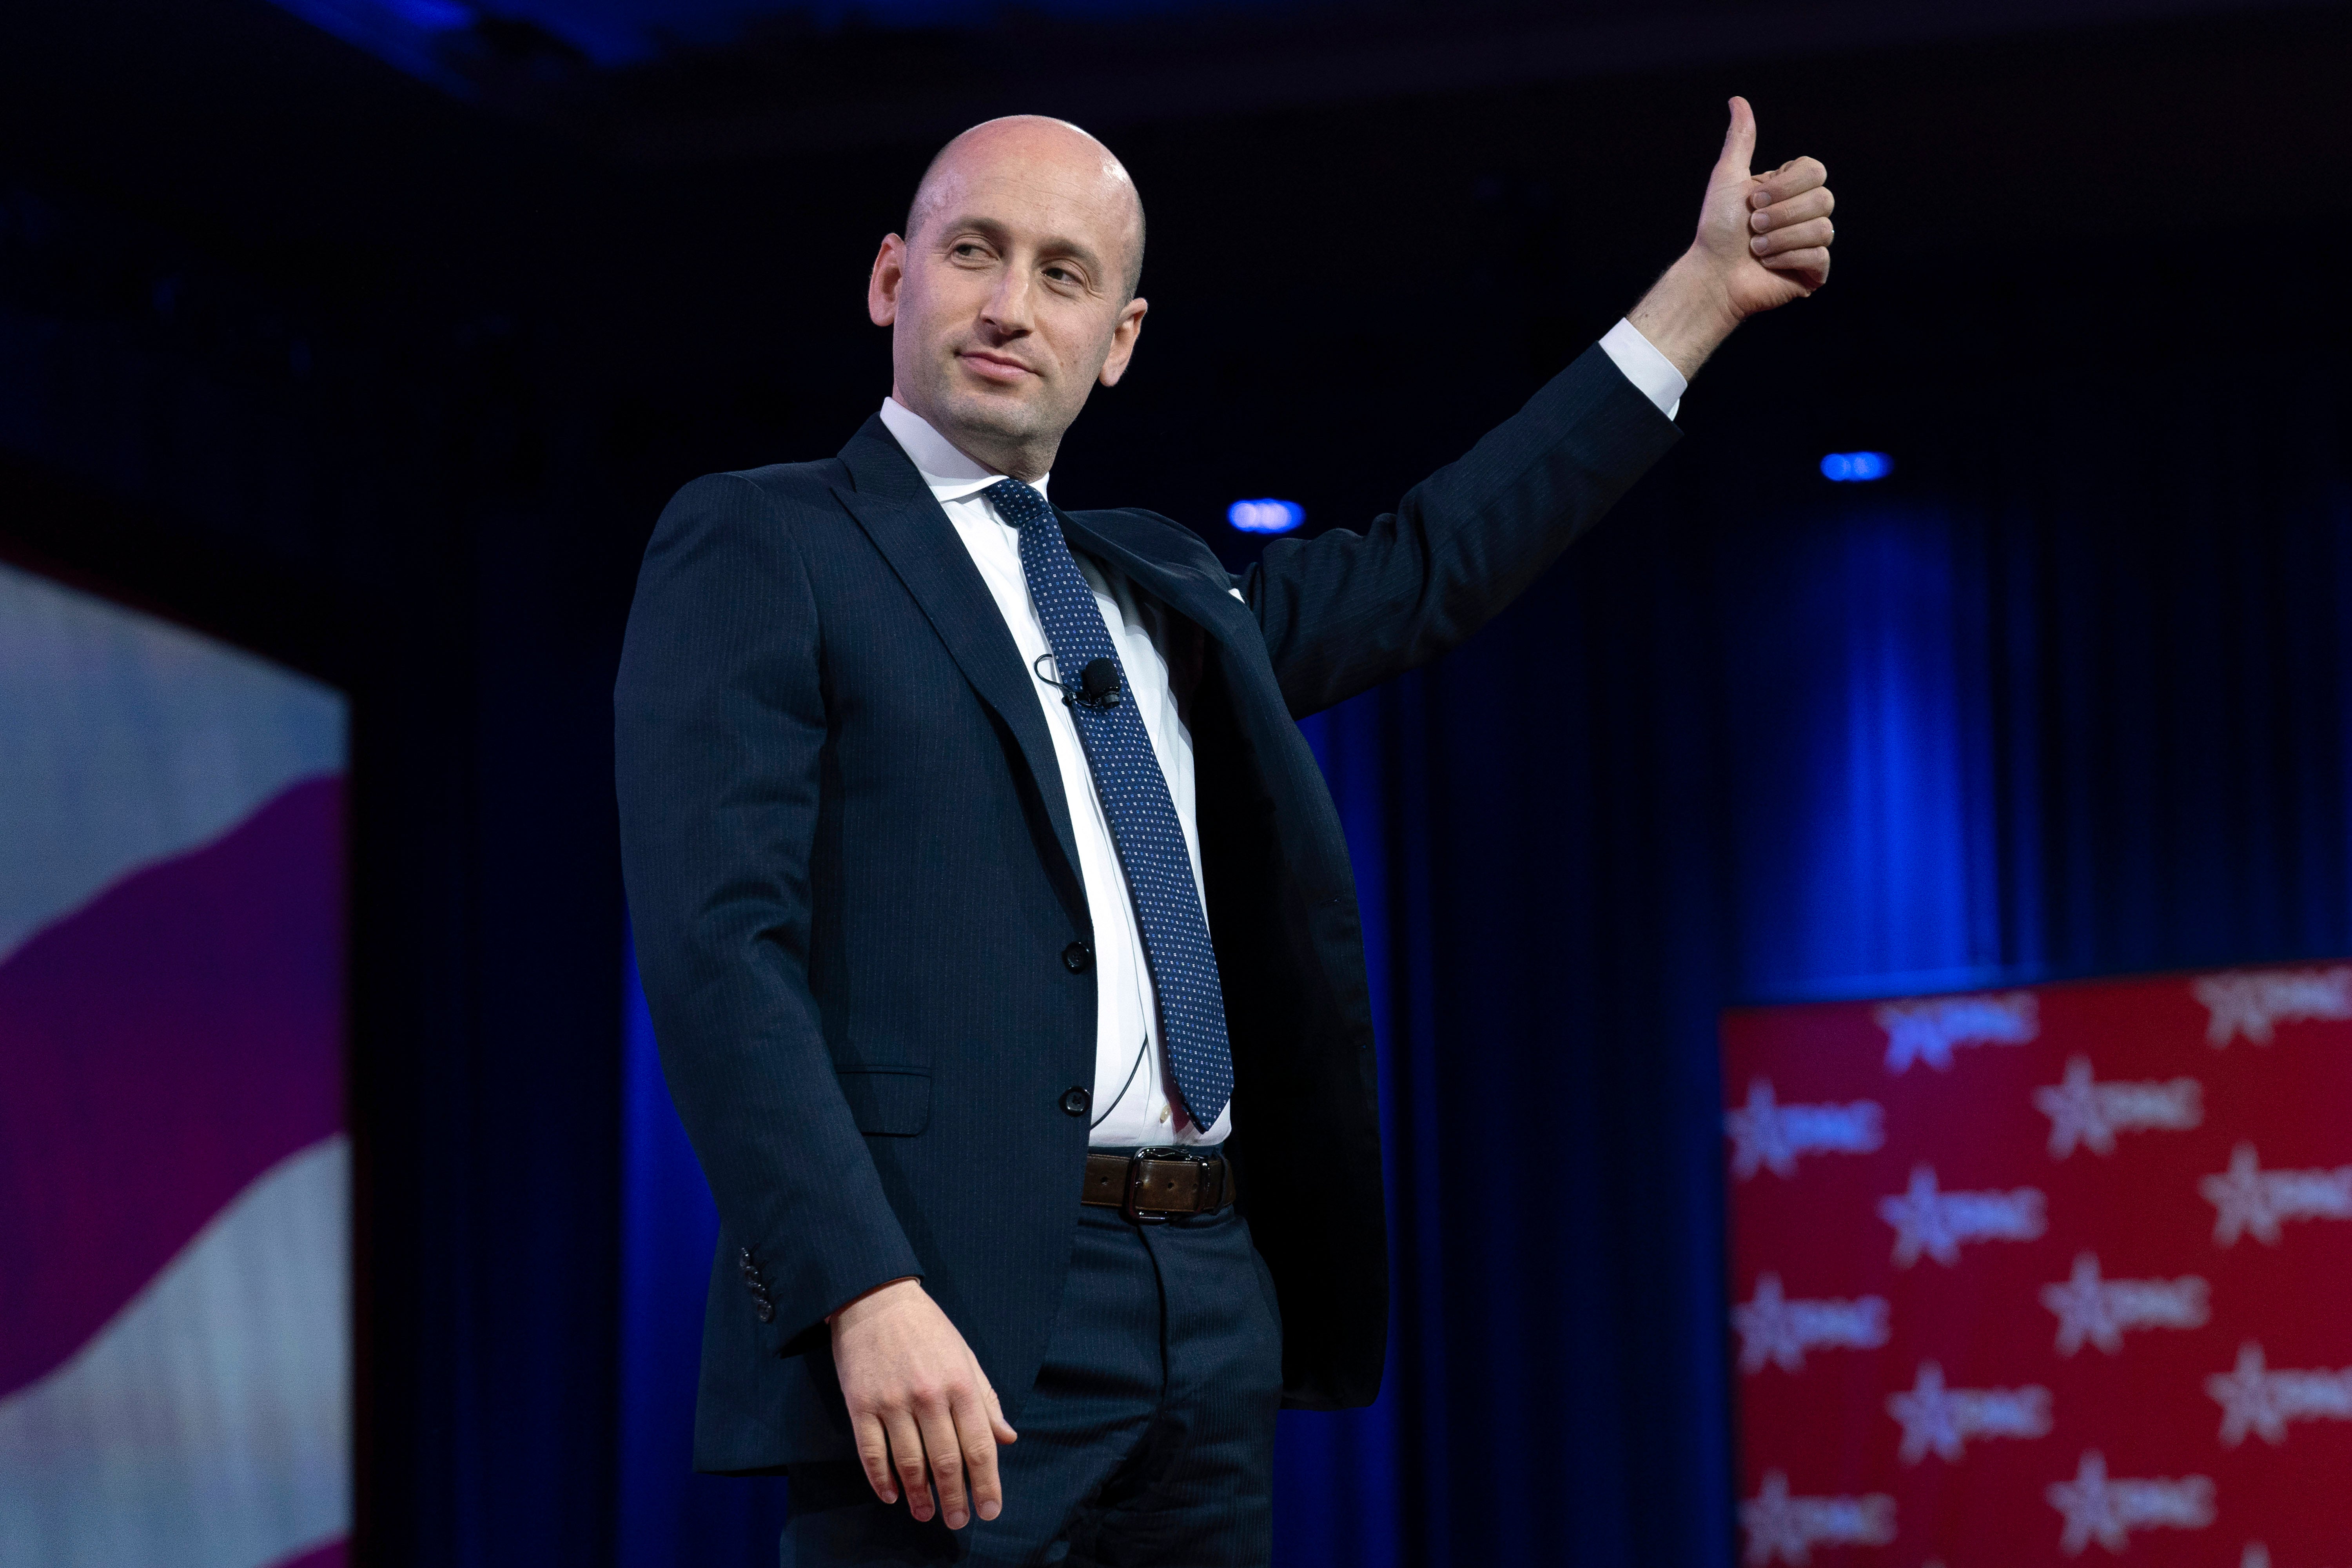 Donald Trump adviser Stephen Miller appears at CPAC on 23 February